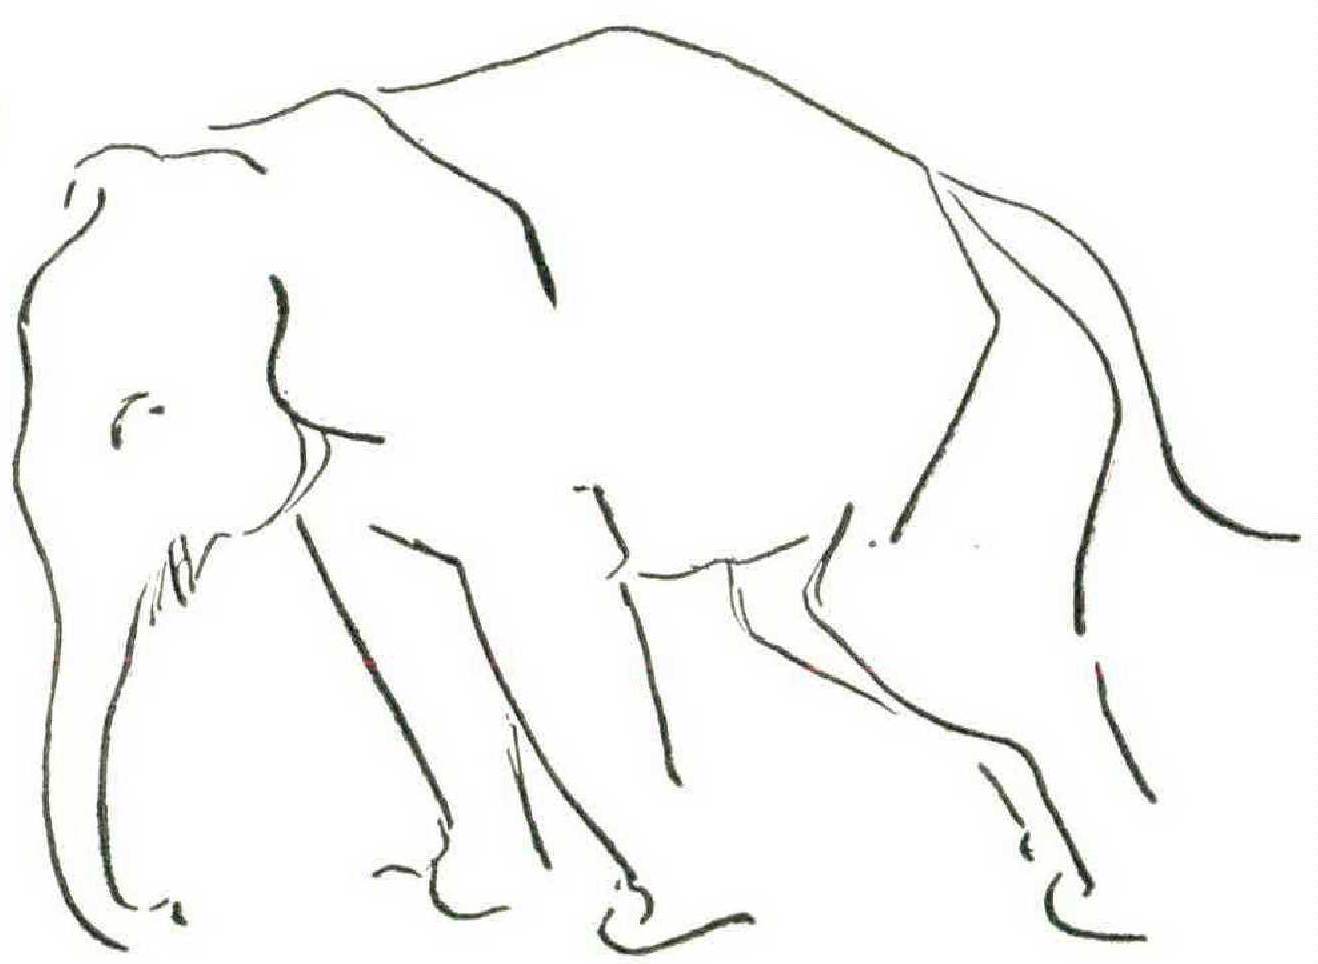 Drawing an Elephant with Pencil – Timed Drawing Exercise